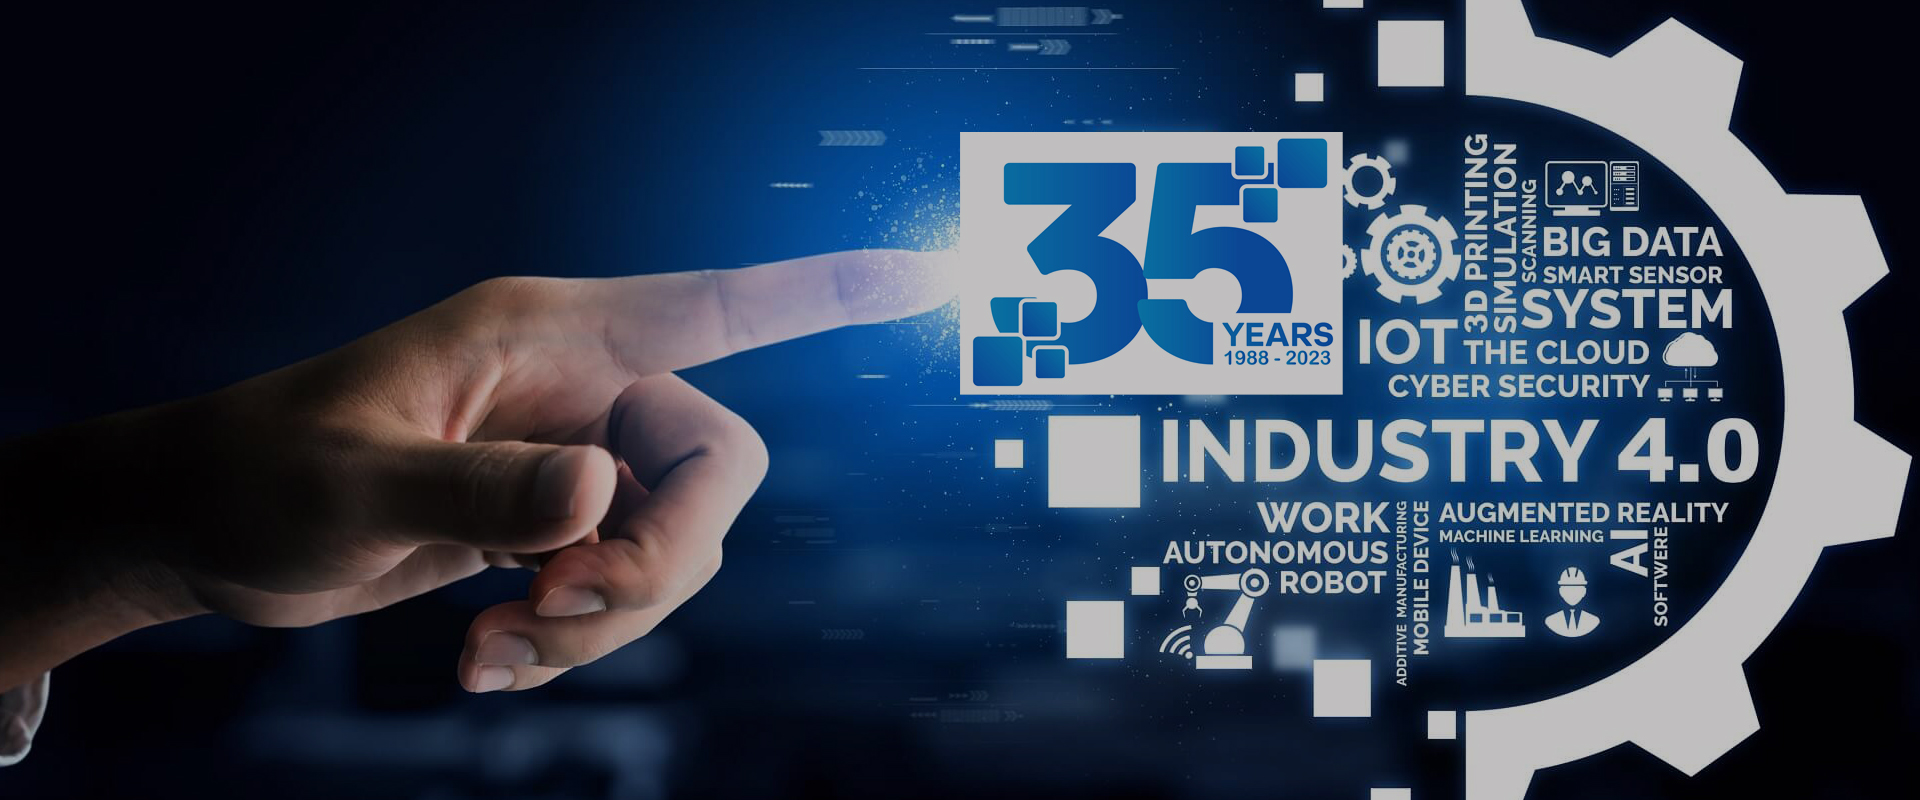 35 years of innovation in the manufacturing of machines